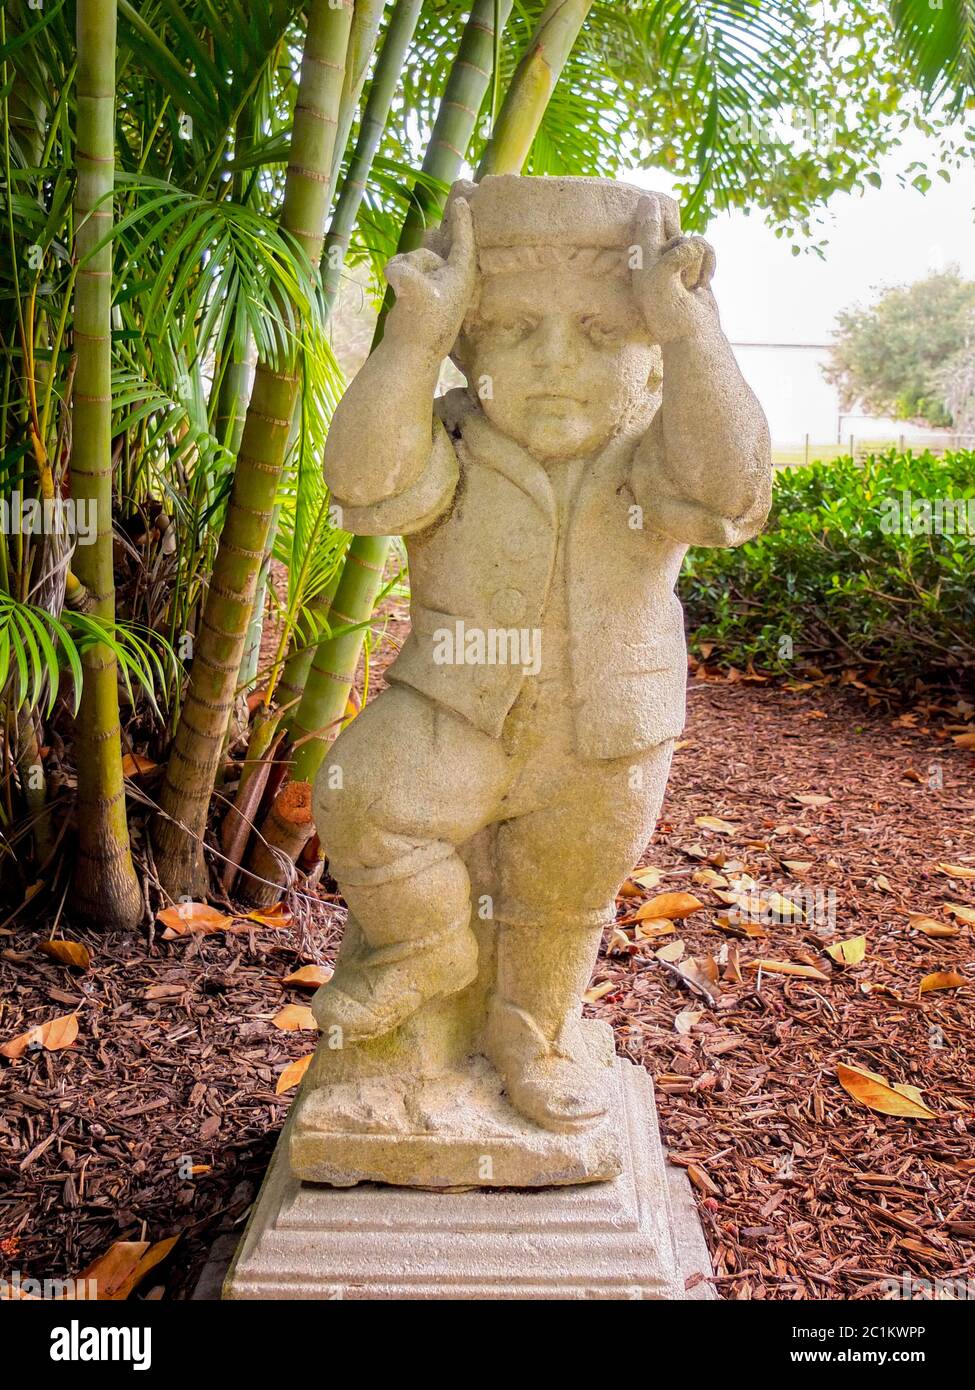 A historic statue of a dwarf is exhibited in the Dwarf Garden of the John and Mable Ringling Museum in Sarasota, FL, part of a European collection of Stock Photo